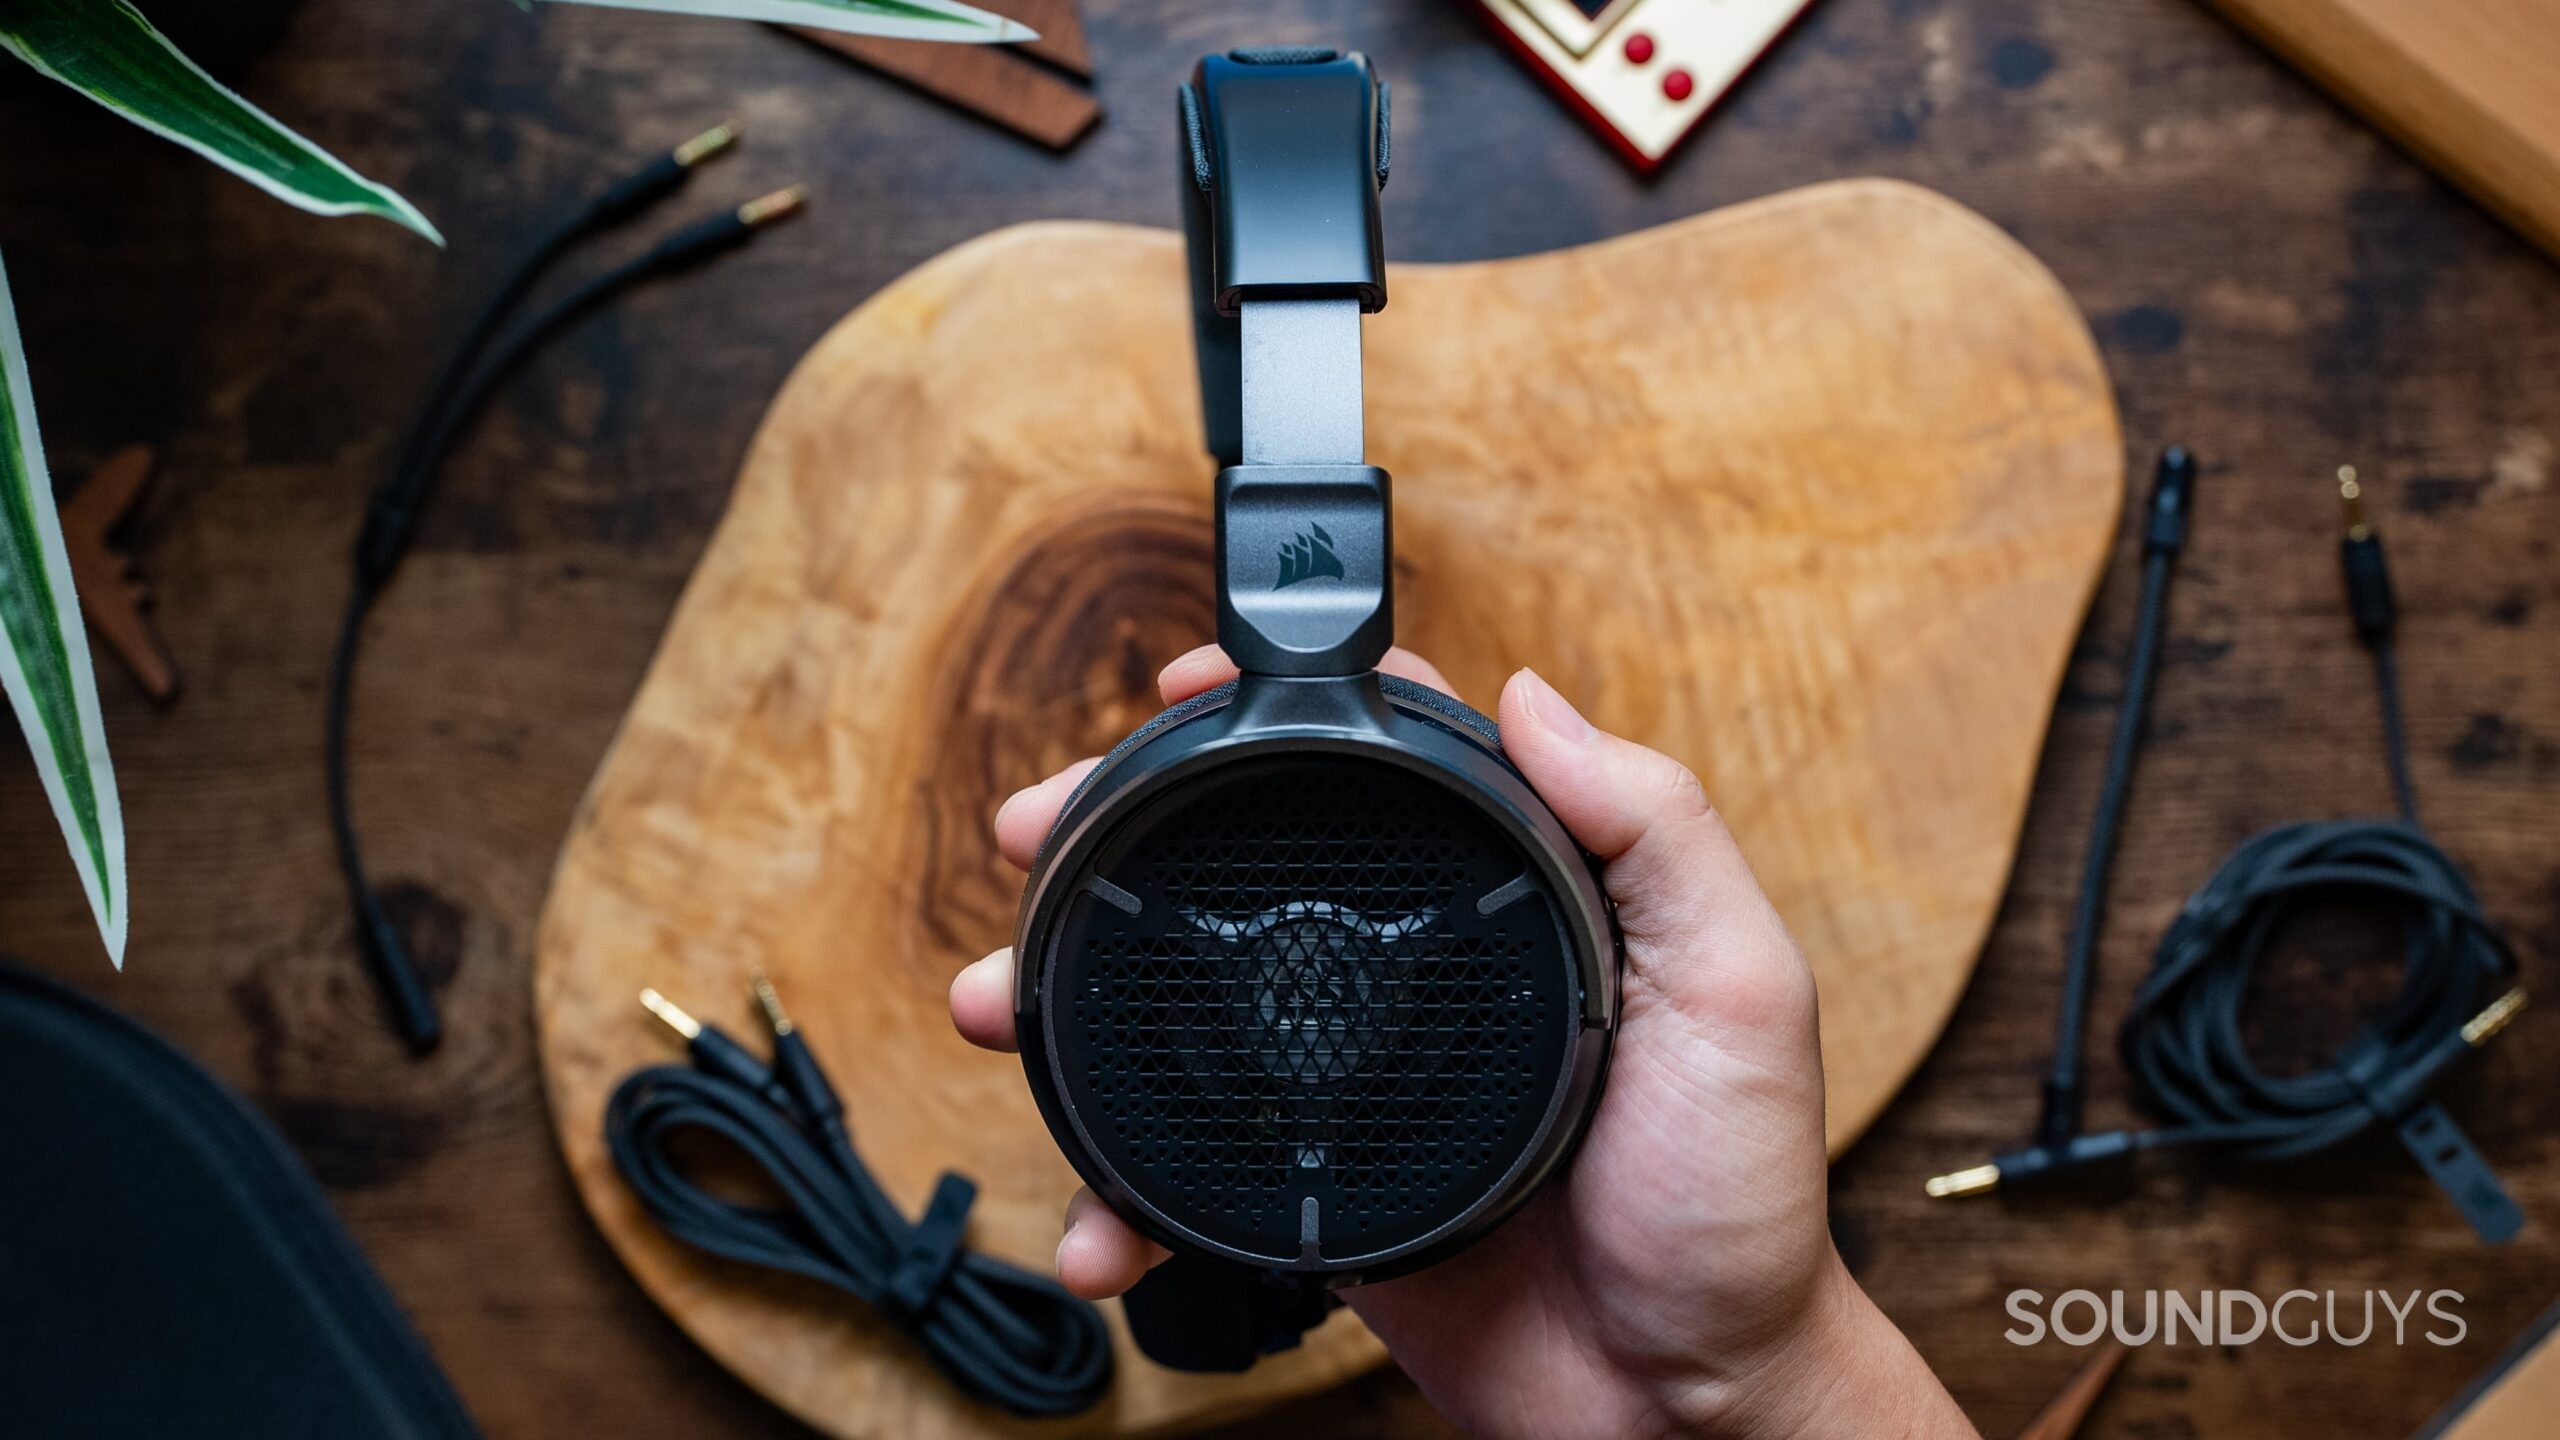 Corsair VIRTUOSO PRO headset in a hand over a table.